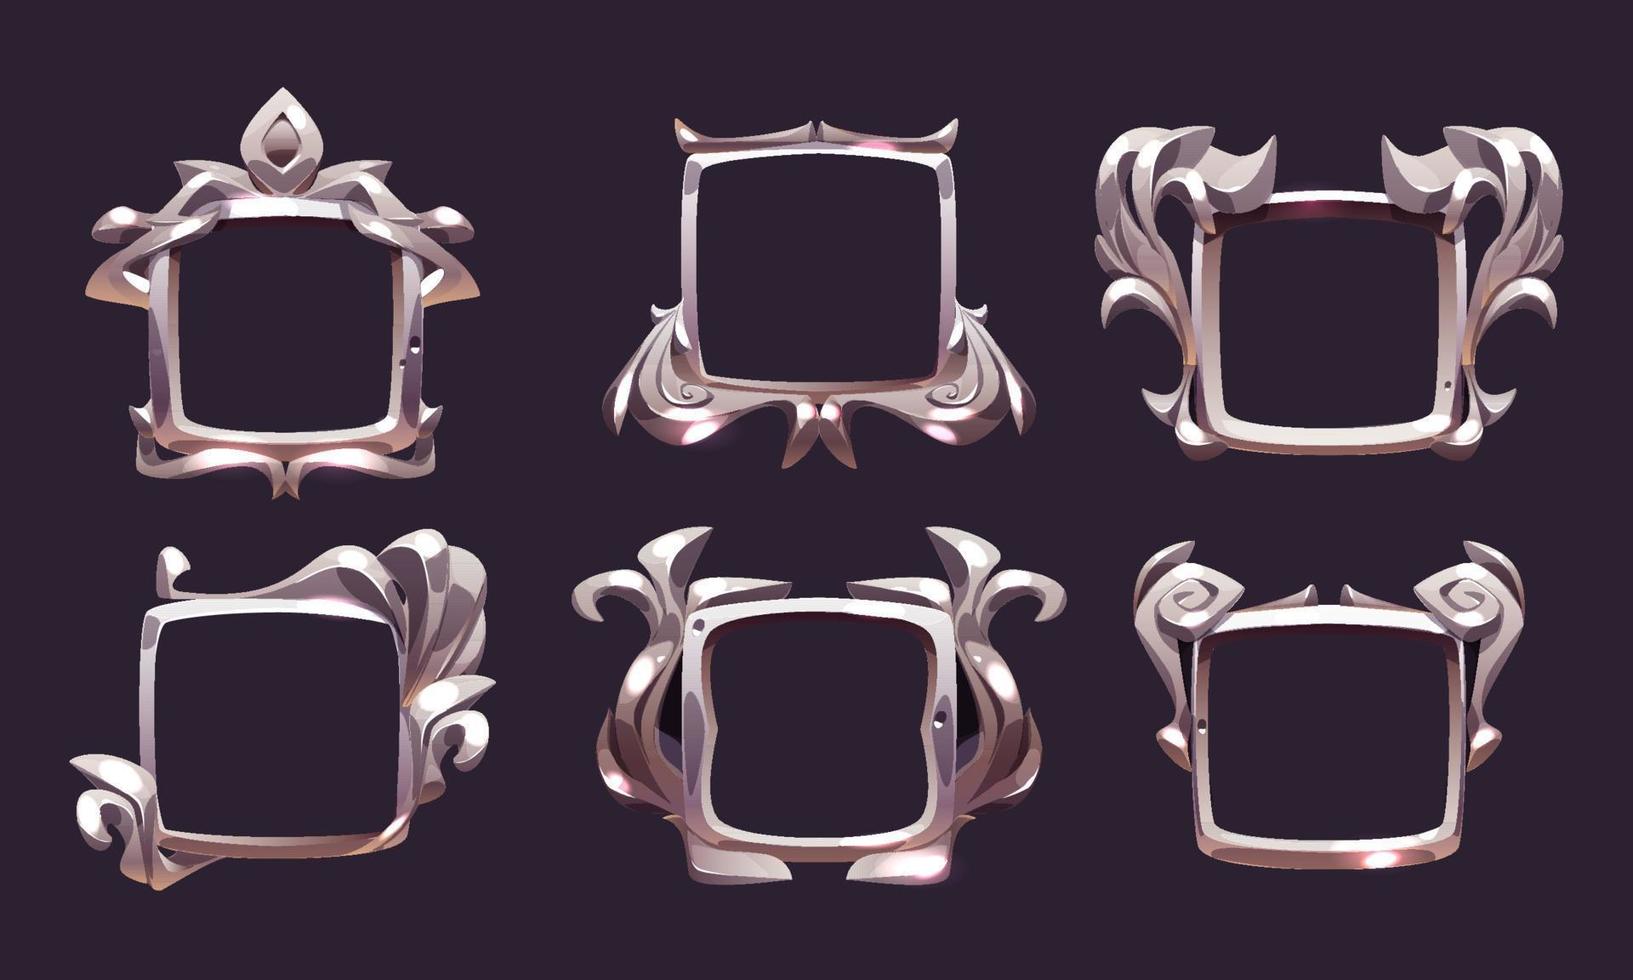 Square ui game frames, medieval silver borders vector